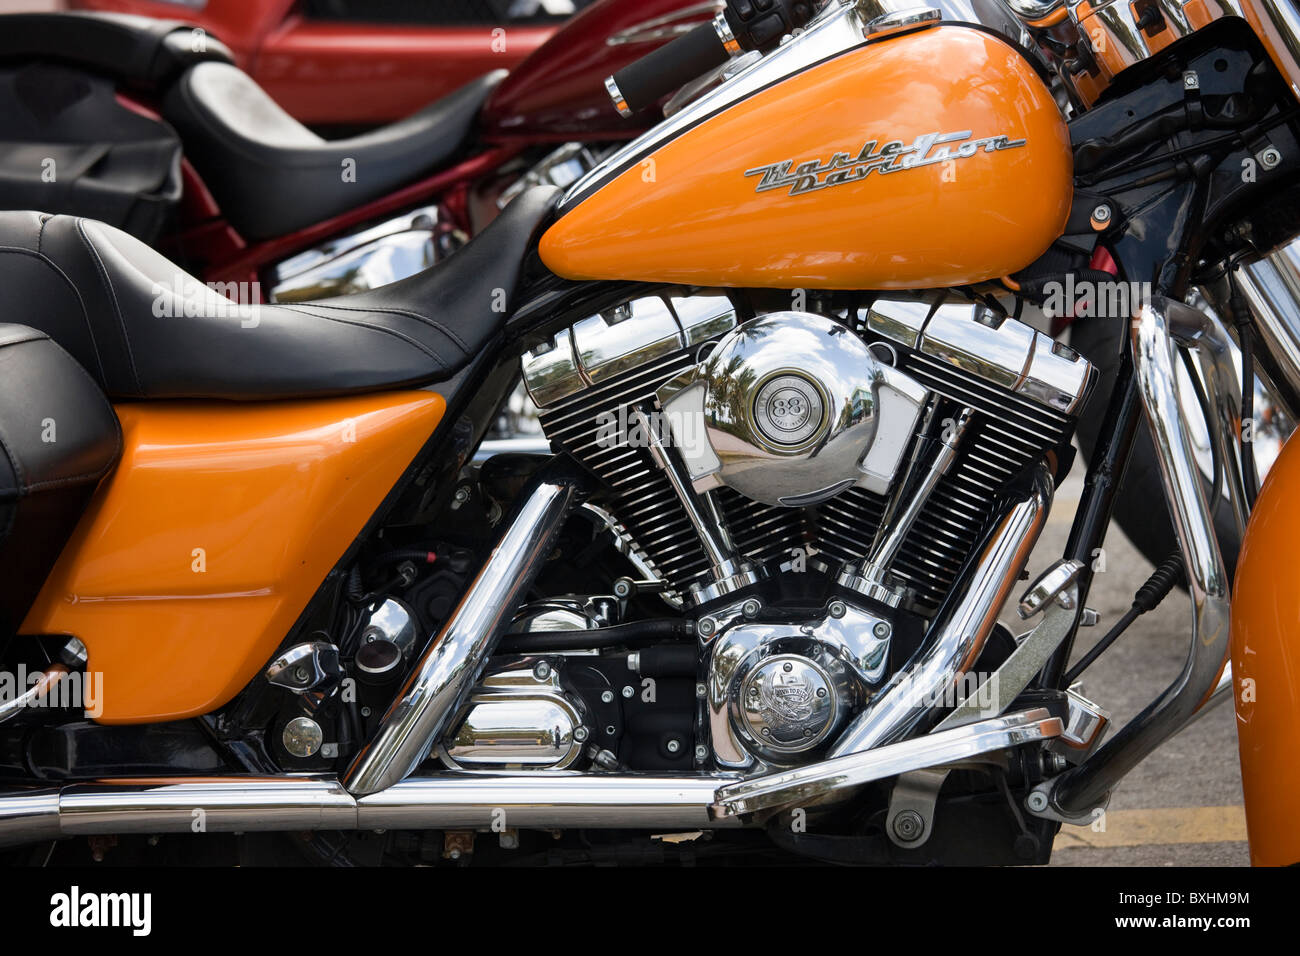 Harley Davidson Road King Motorcycle With 88 Cubic Inches Twin Cam Engine South Beach Miami Florida Stock Photo Alamy